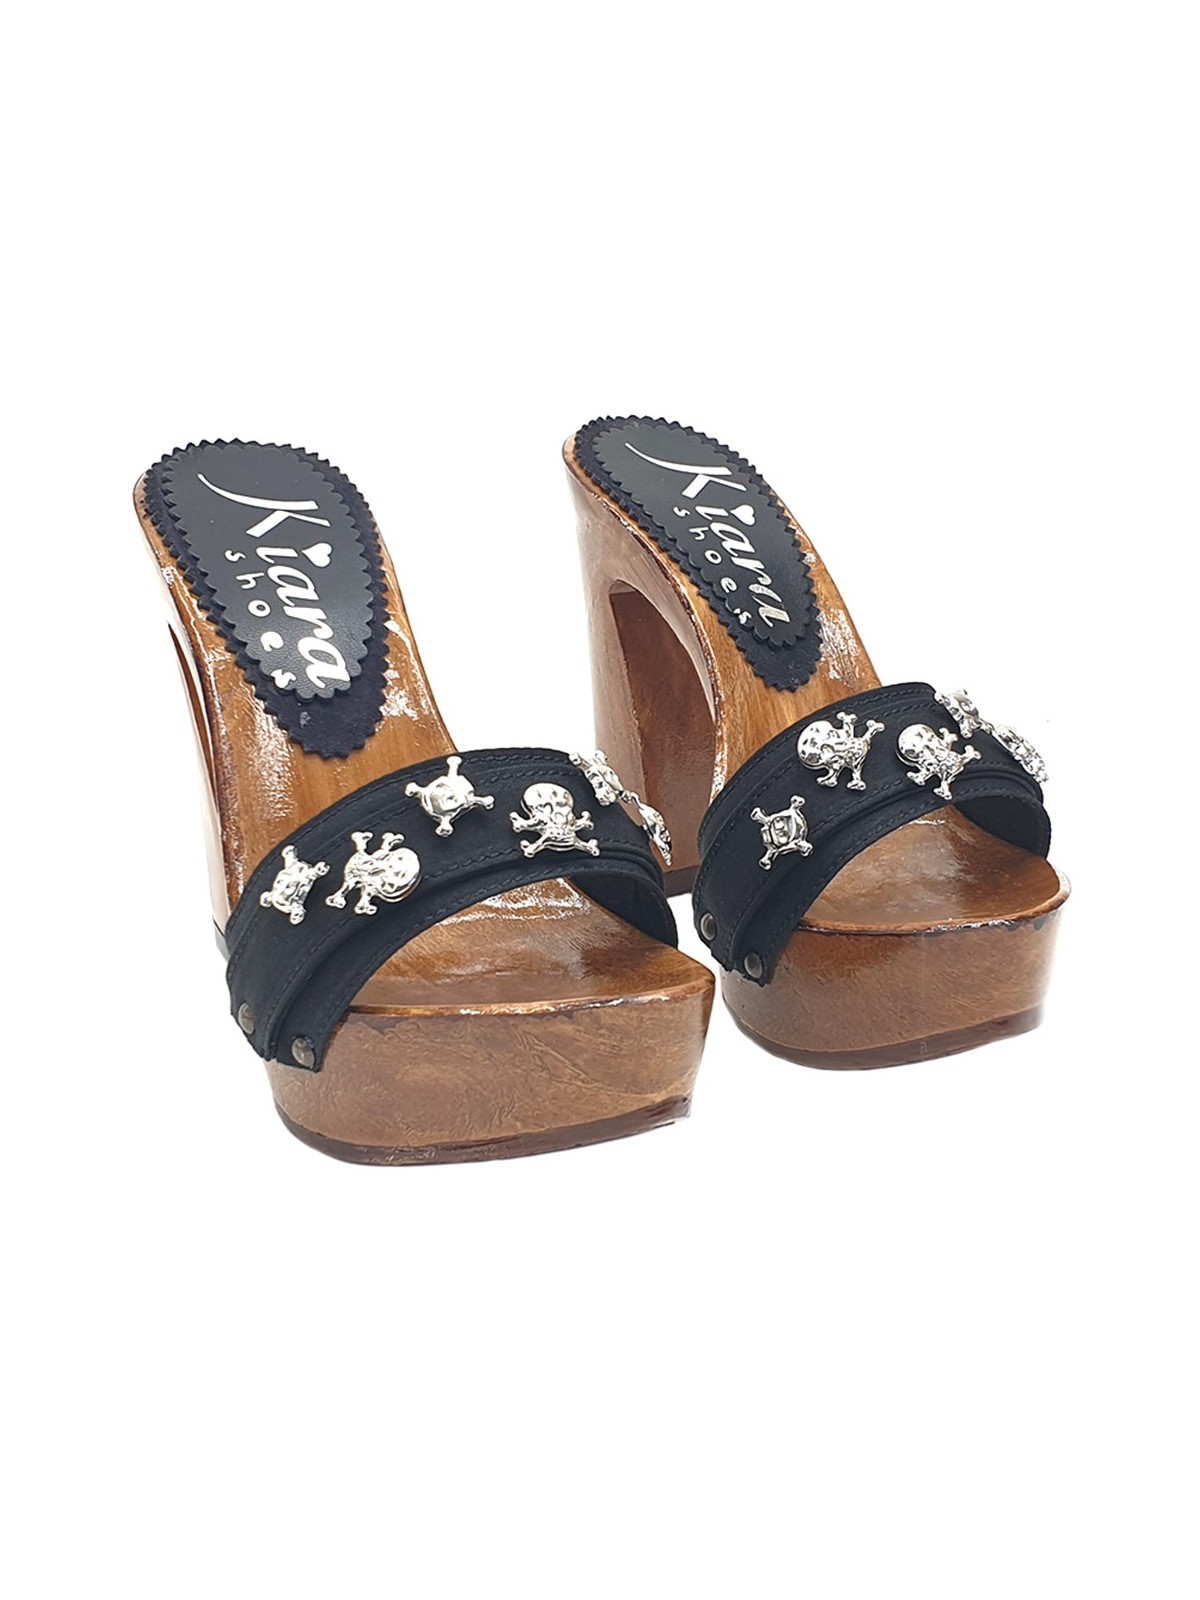 CLOGS WITH SILVER SKULLS AND COMFY HEEL